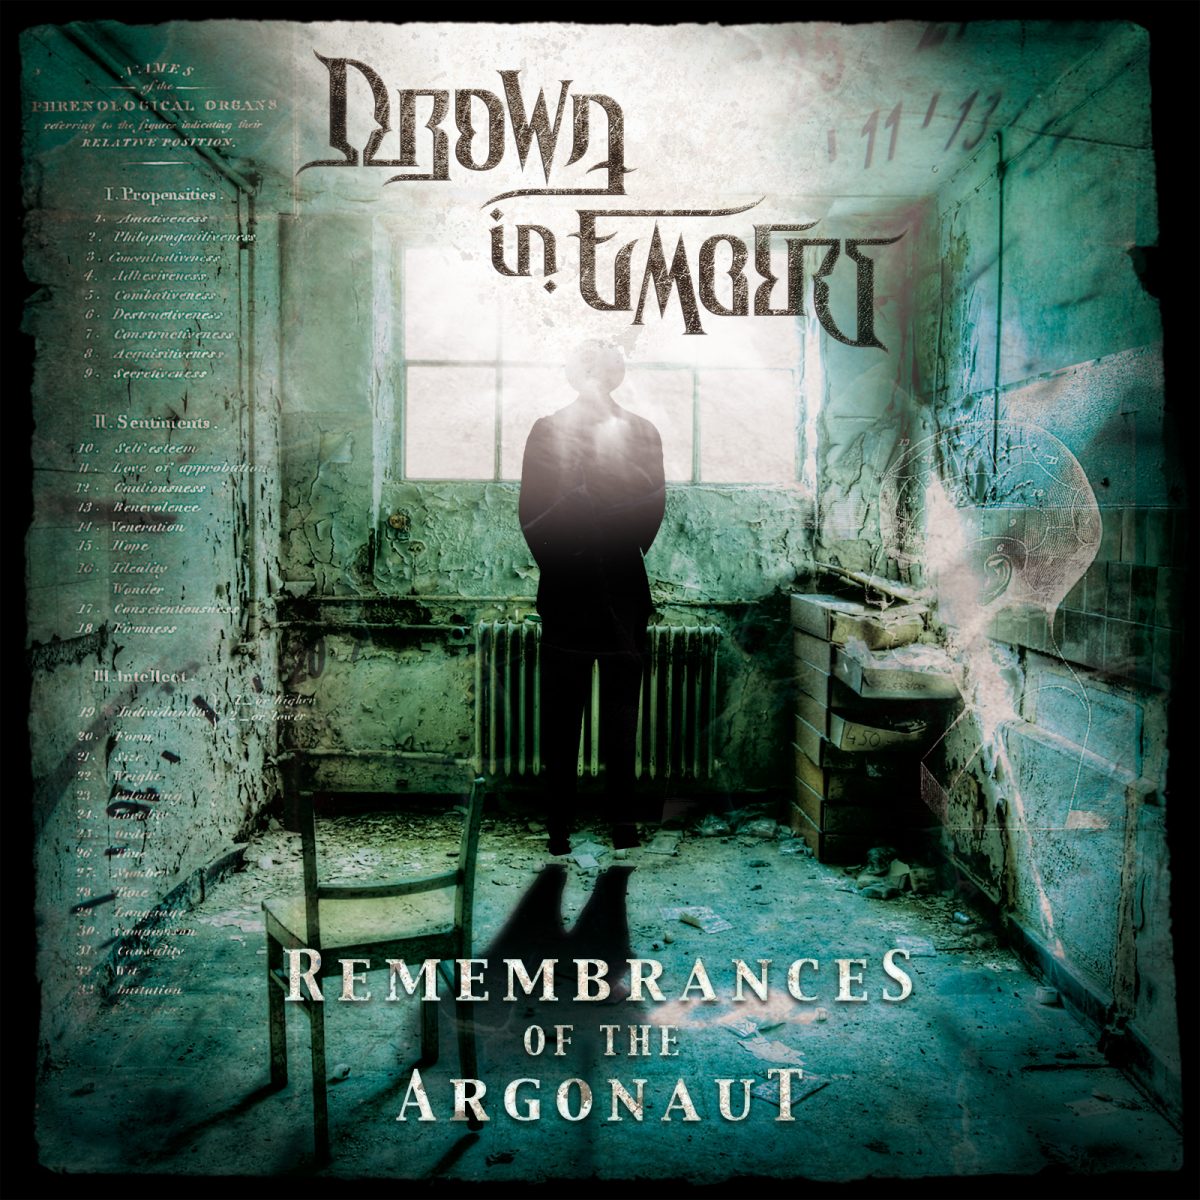 Drown_in_Embers-Remembrances_of_the_Argonaut